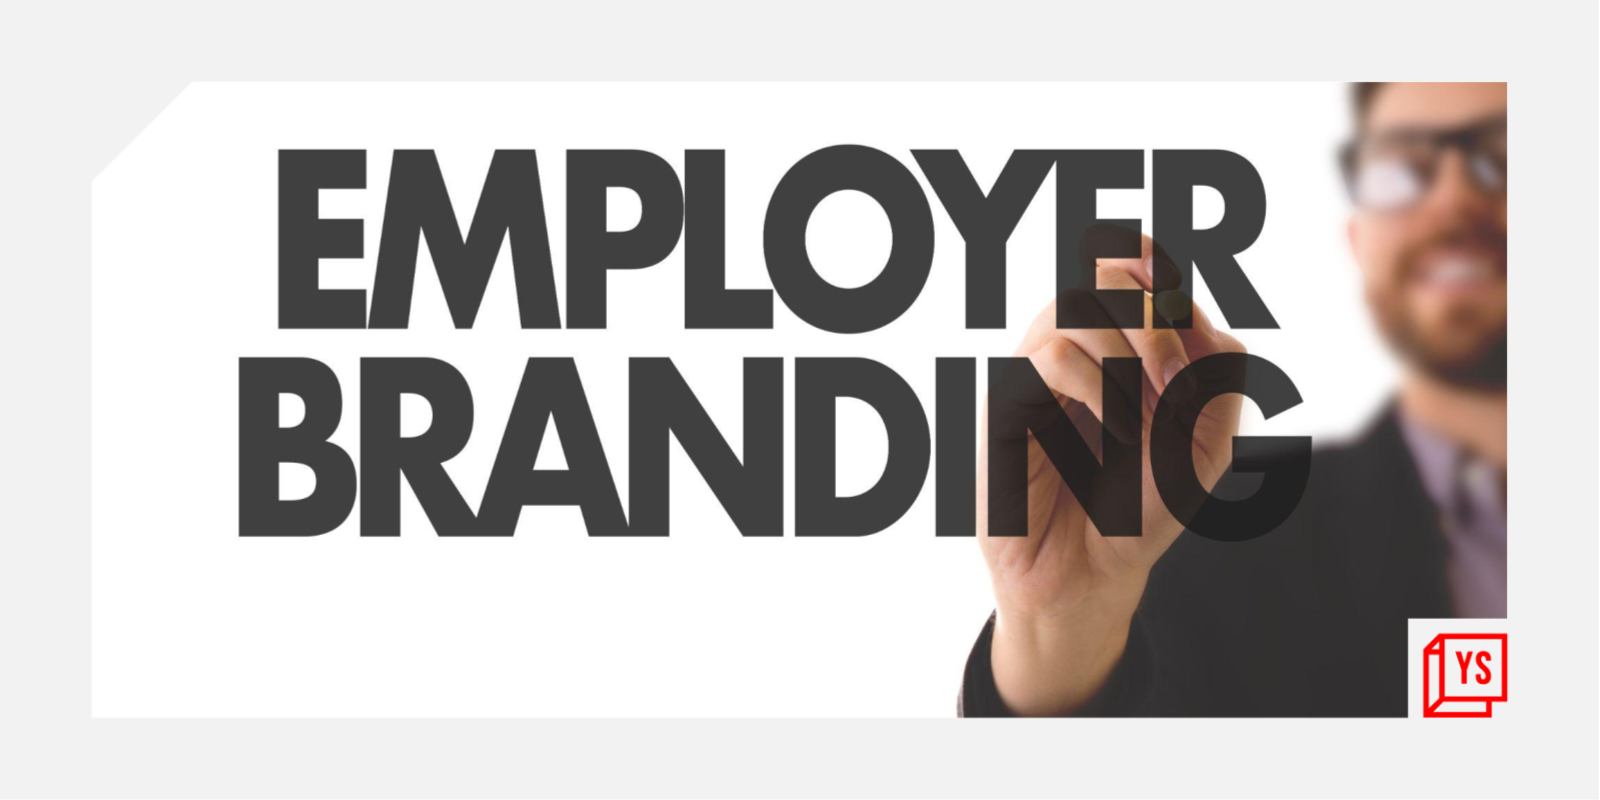 Employer Branding: Imperative for talent attraction and retention

